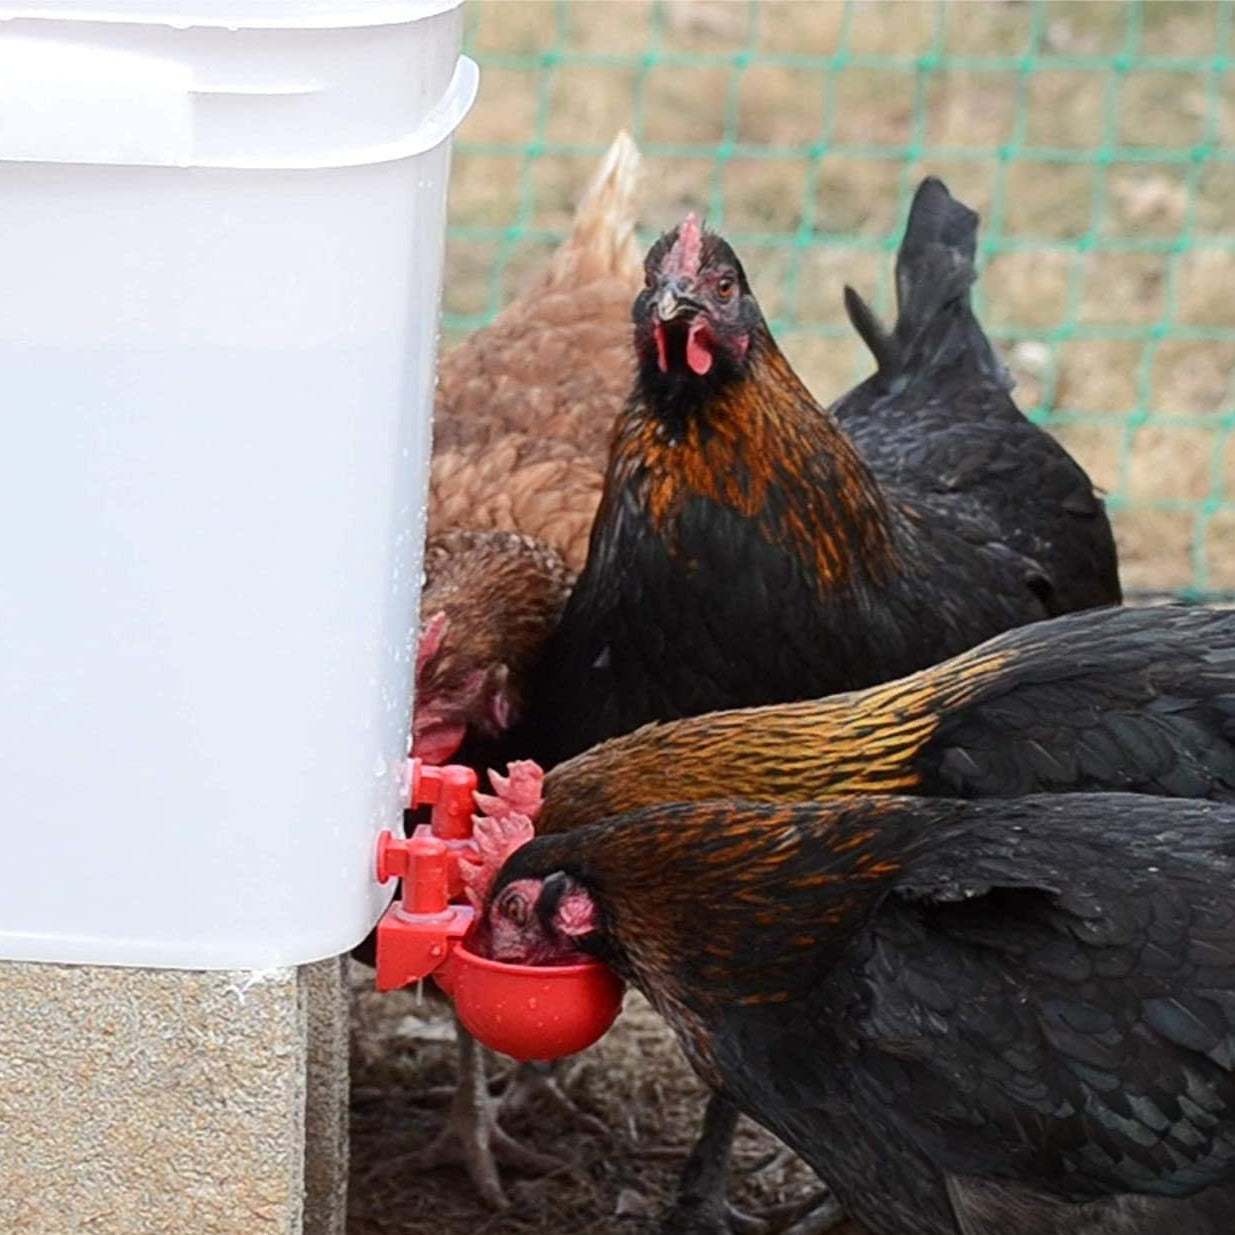 ( New Year Hot Sale - 30% OFF) Automatic Chicken Water Cup Bird Coop